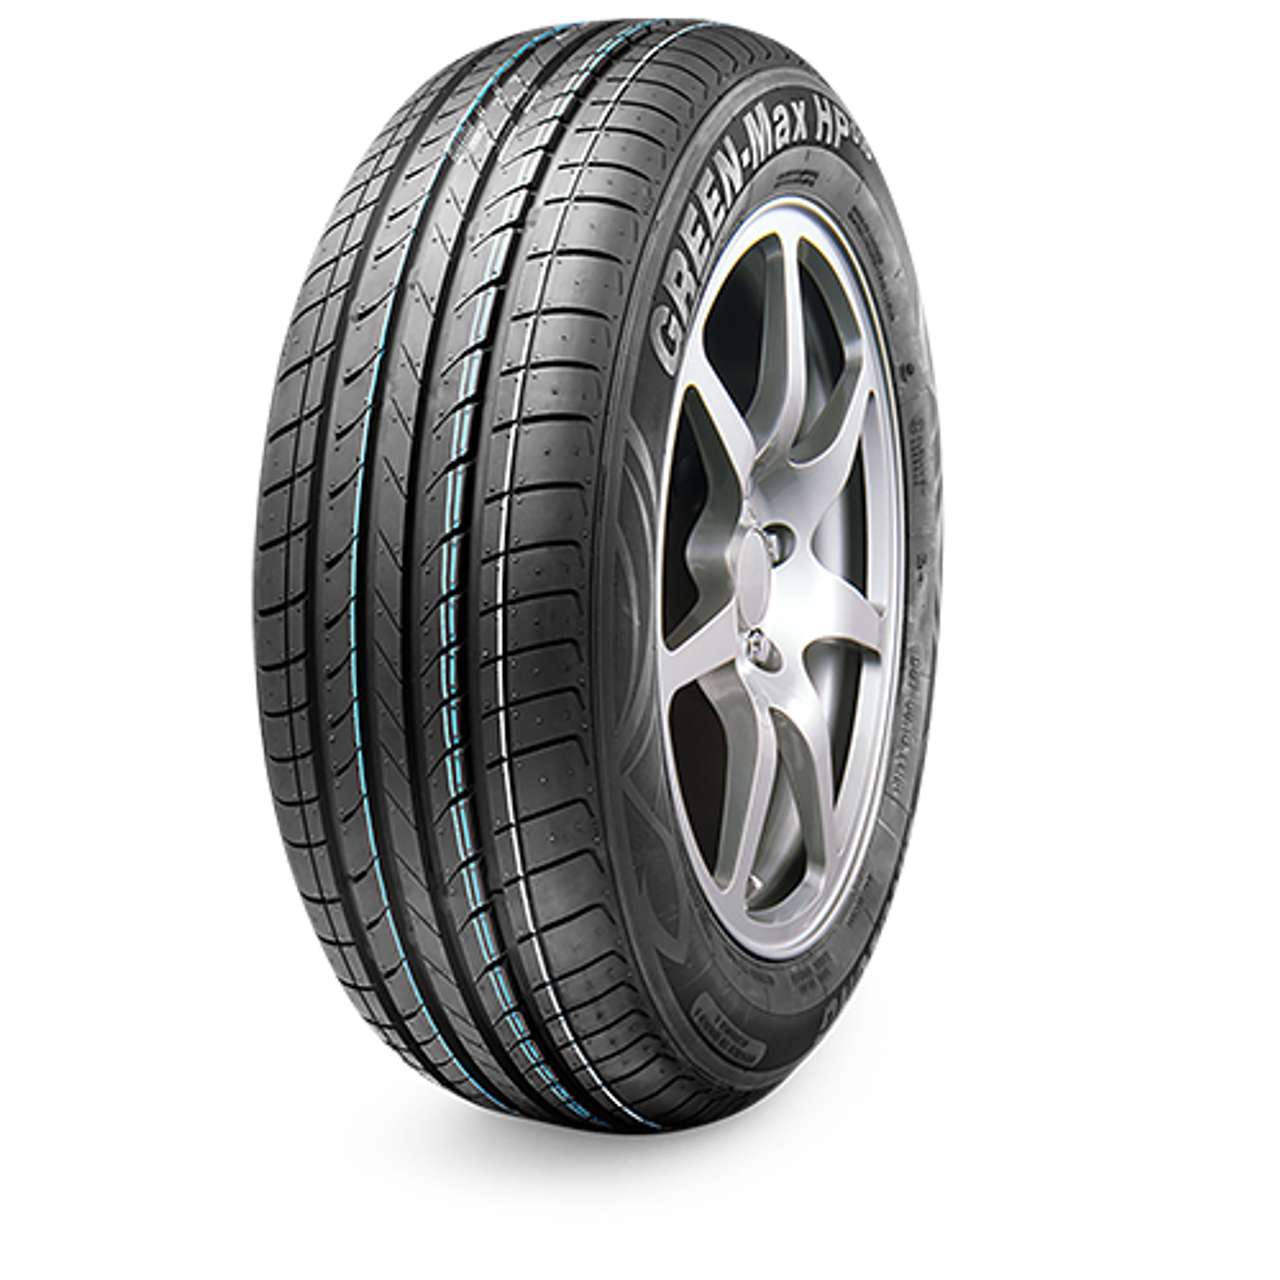 LINGLONG GREEN-MAX HP010 185/55R14 80H MFS BSW